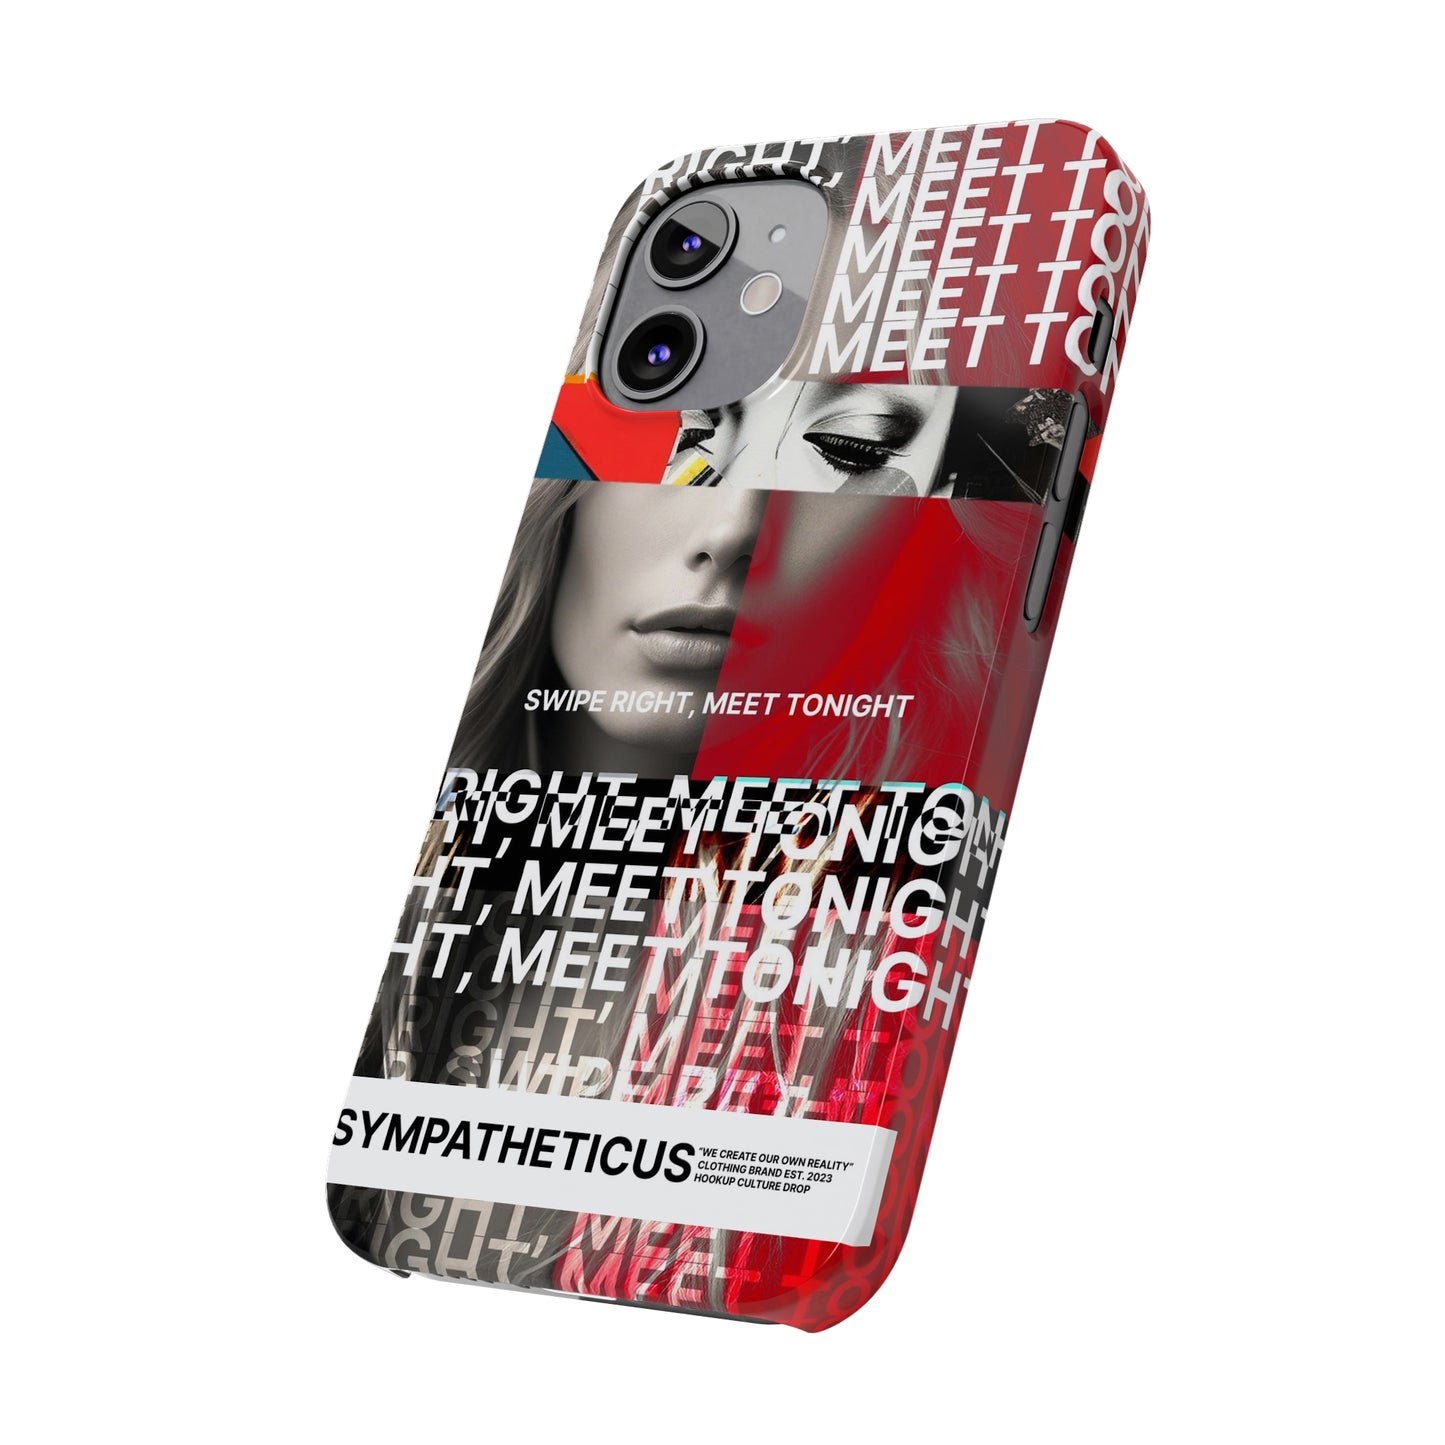 Hookup culture special iphone case-11